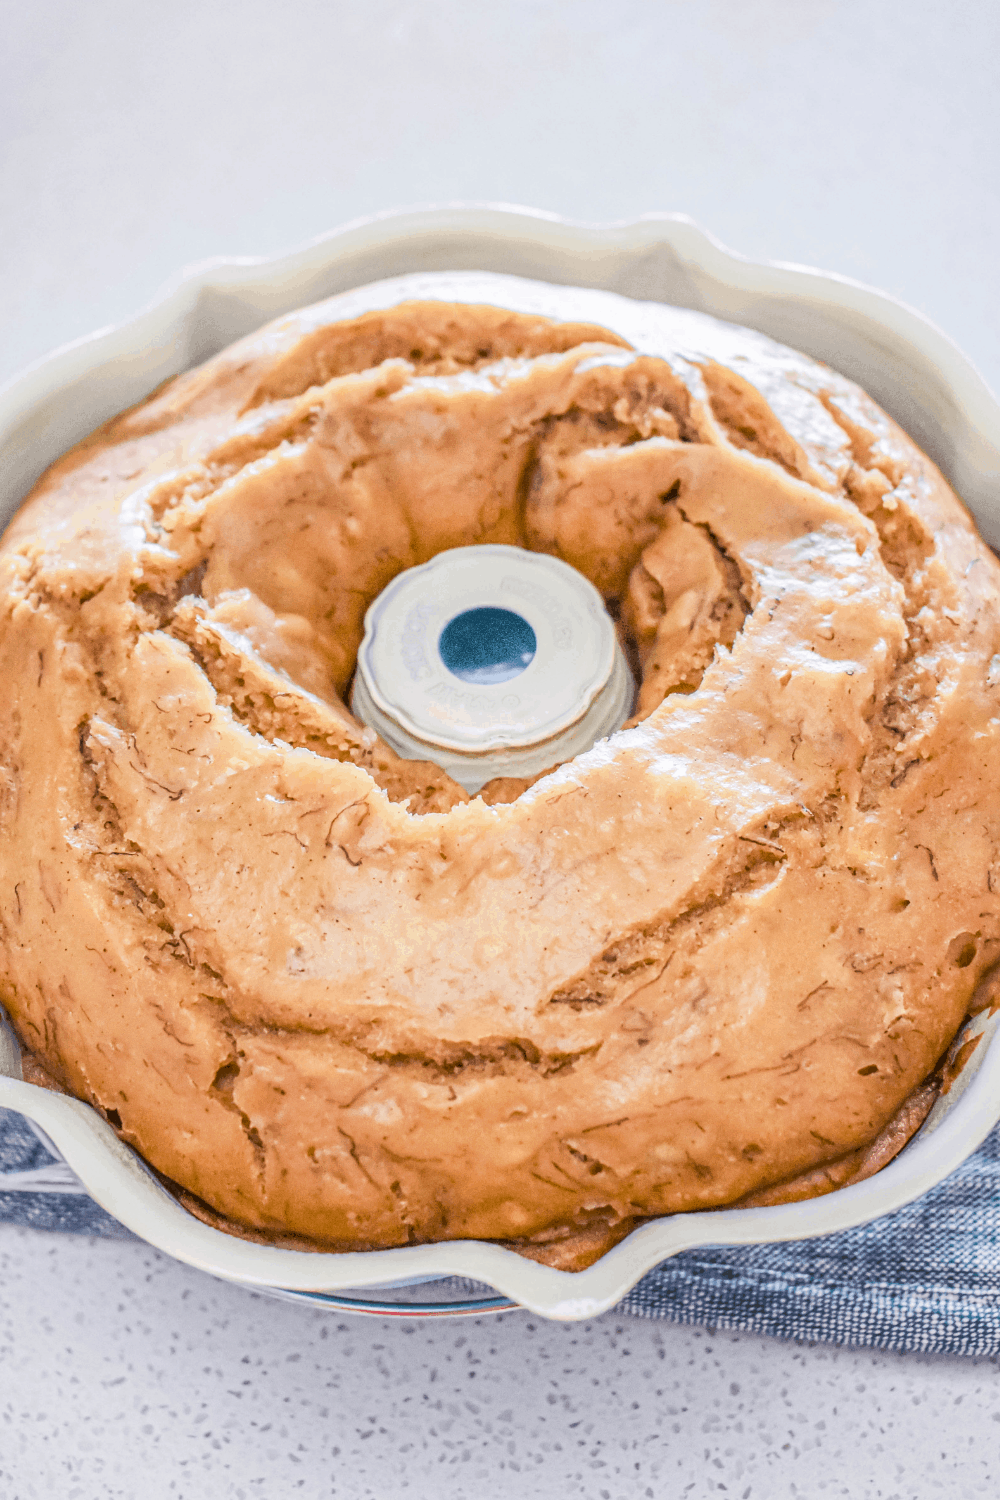 instant Pot banana bread that has just been removed from the pressure cooker, still in the bundt pan